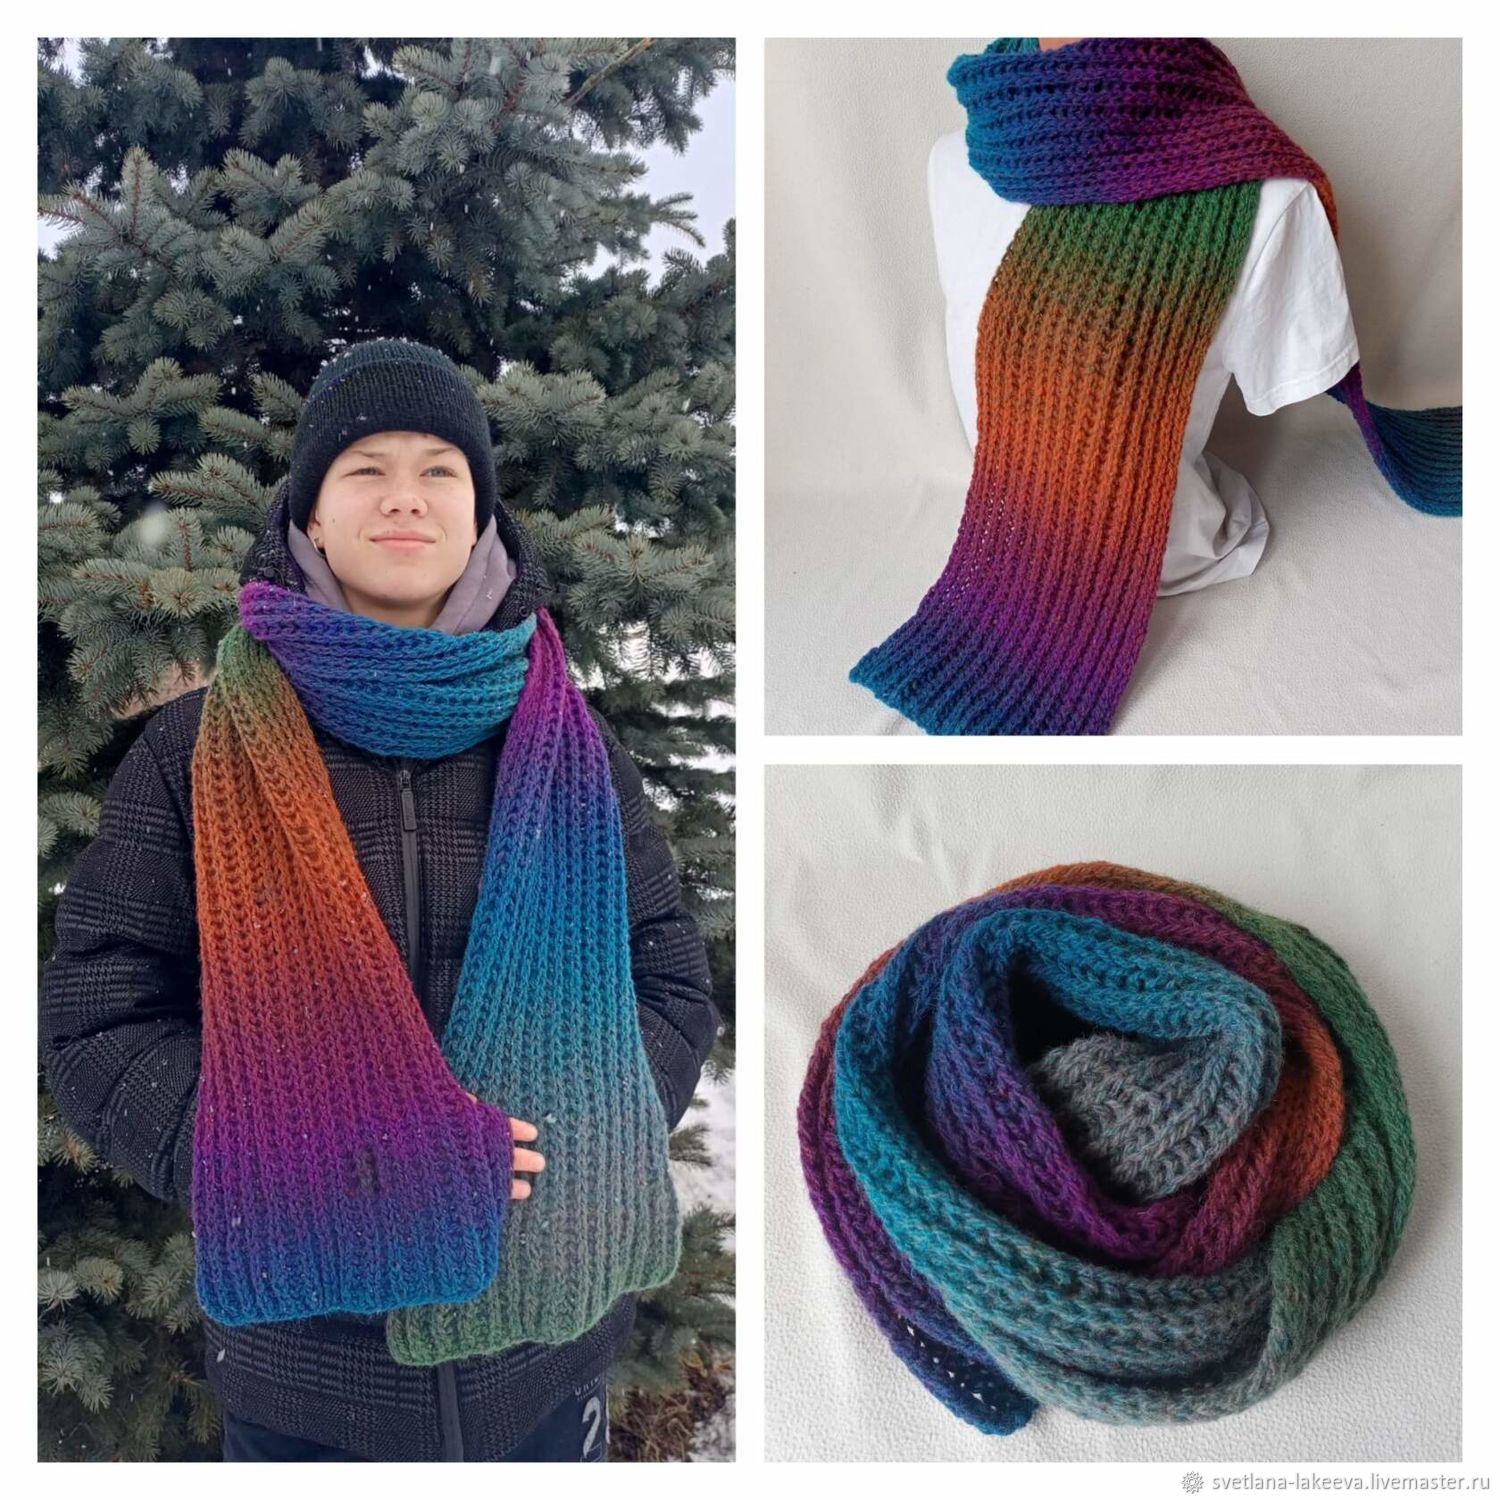 Patterns available as Ravelry Downloads